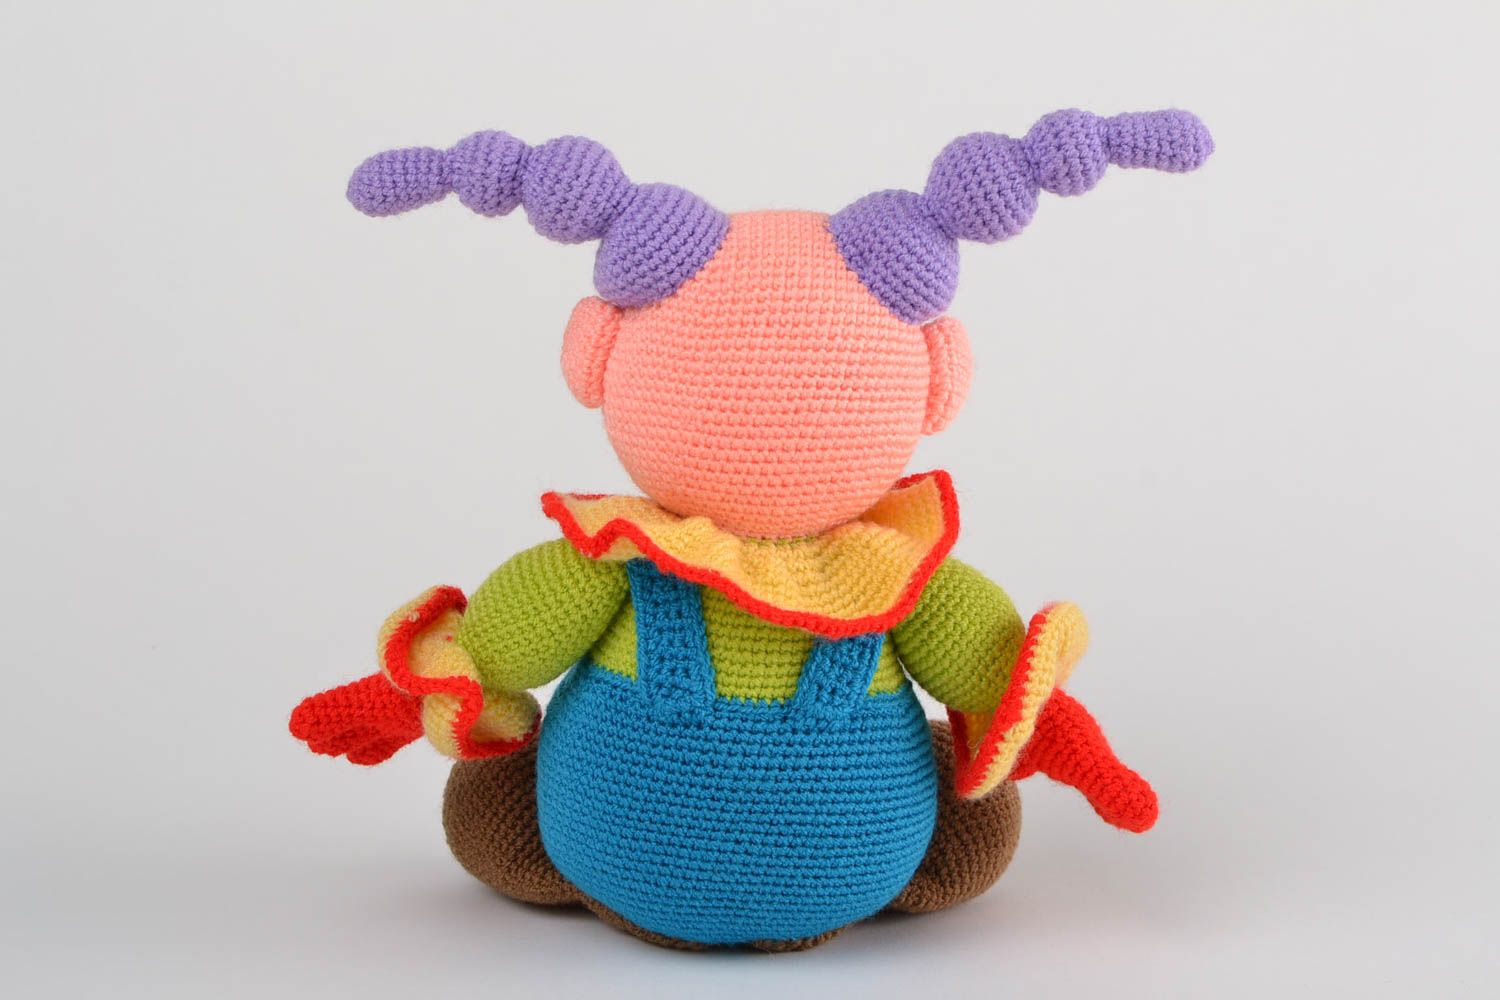 Handmade designer soft toy crocheted of acrylic threads colorful bright clown photo 5